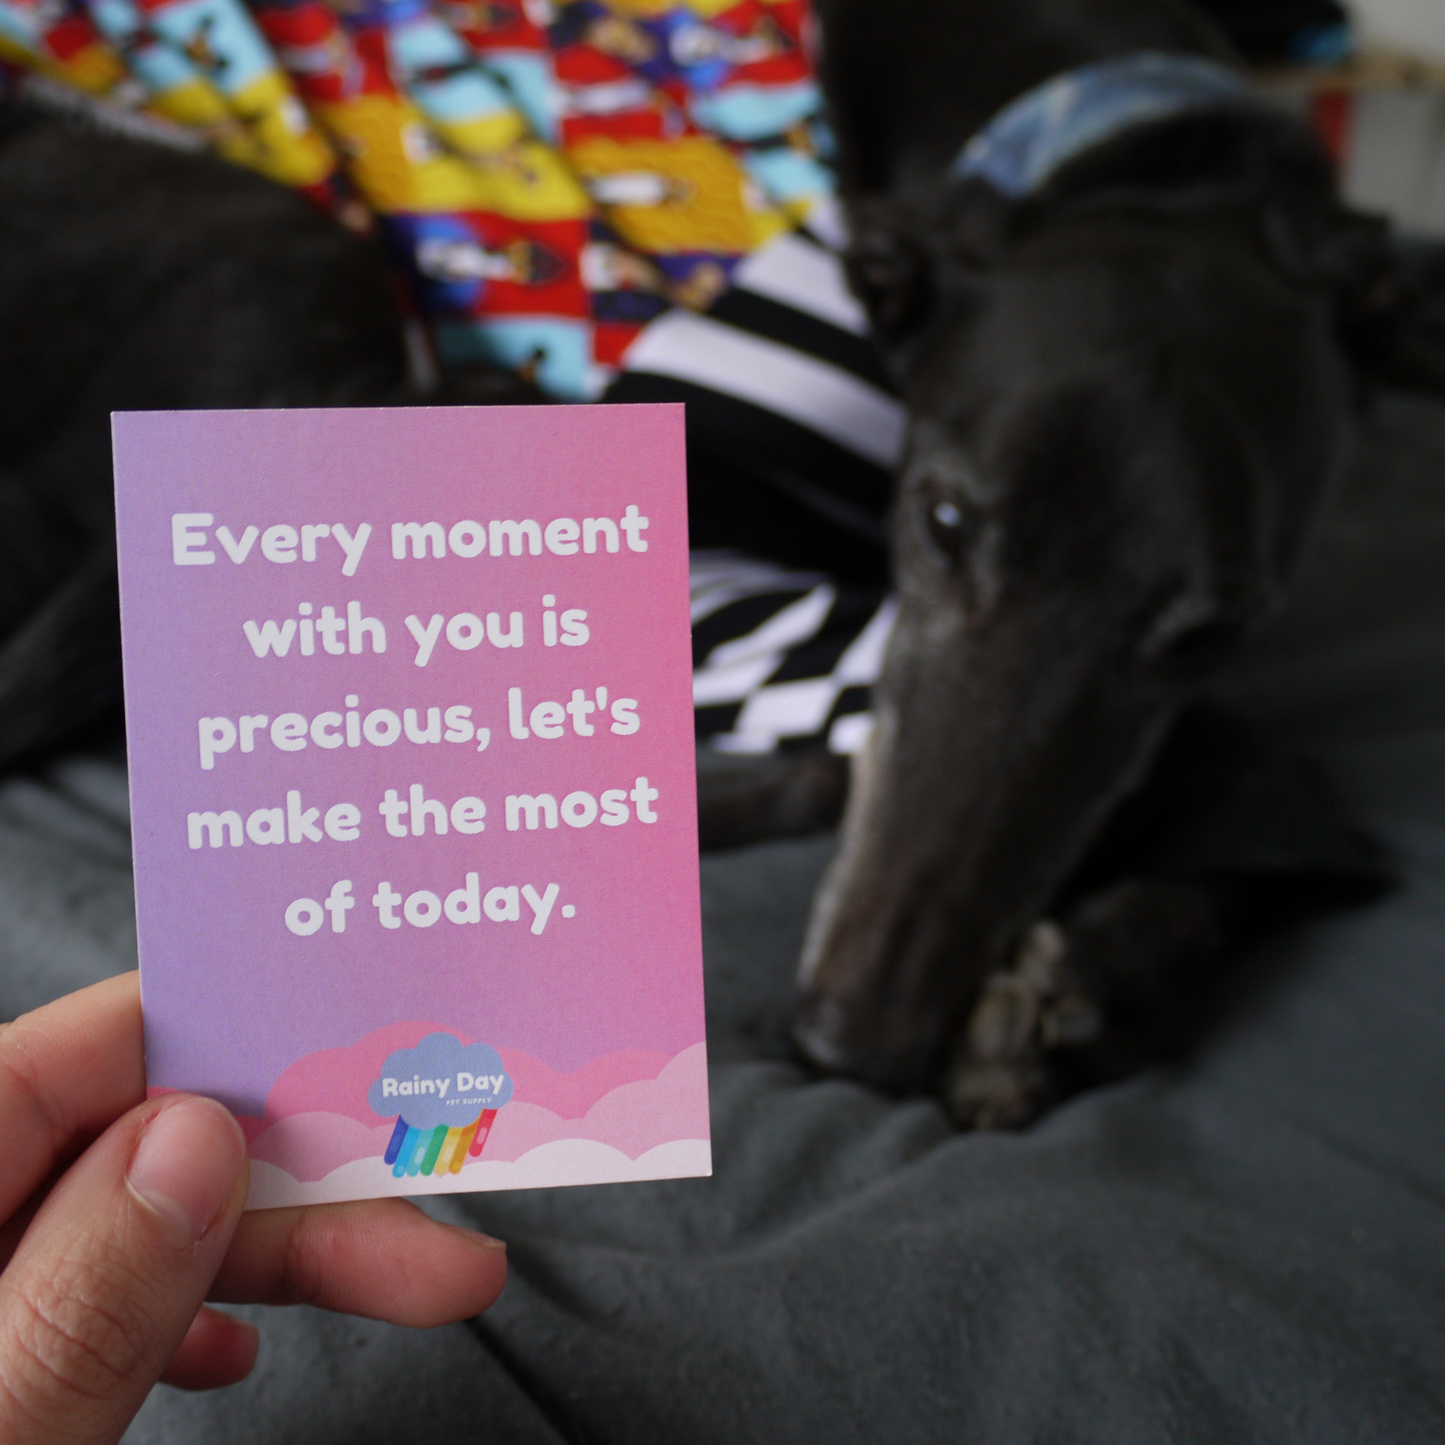 Affirmation card deck: What would your dog say?